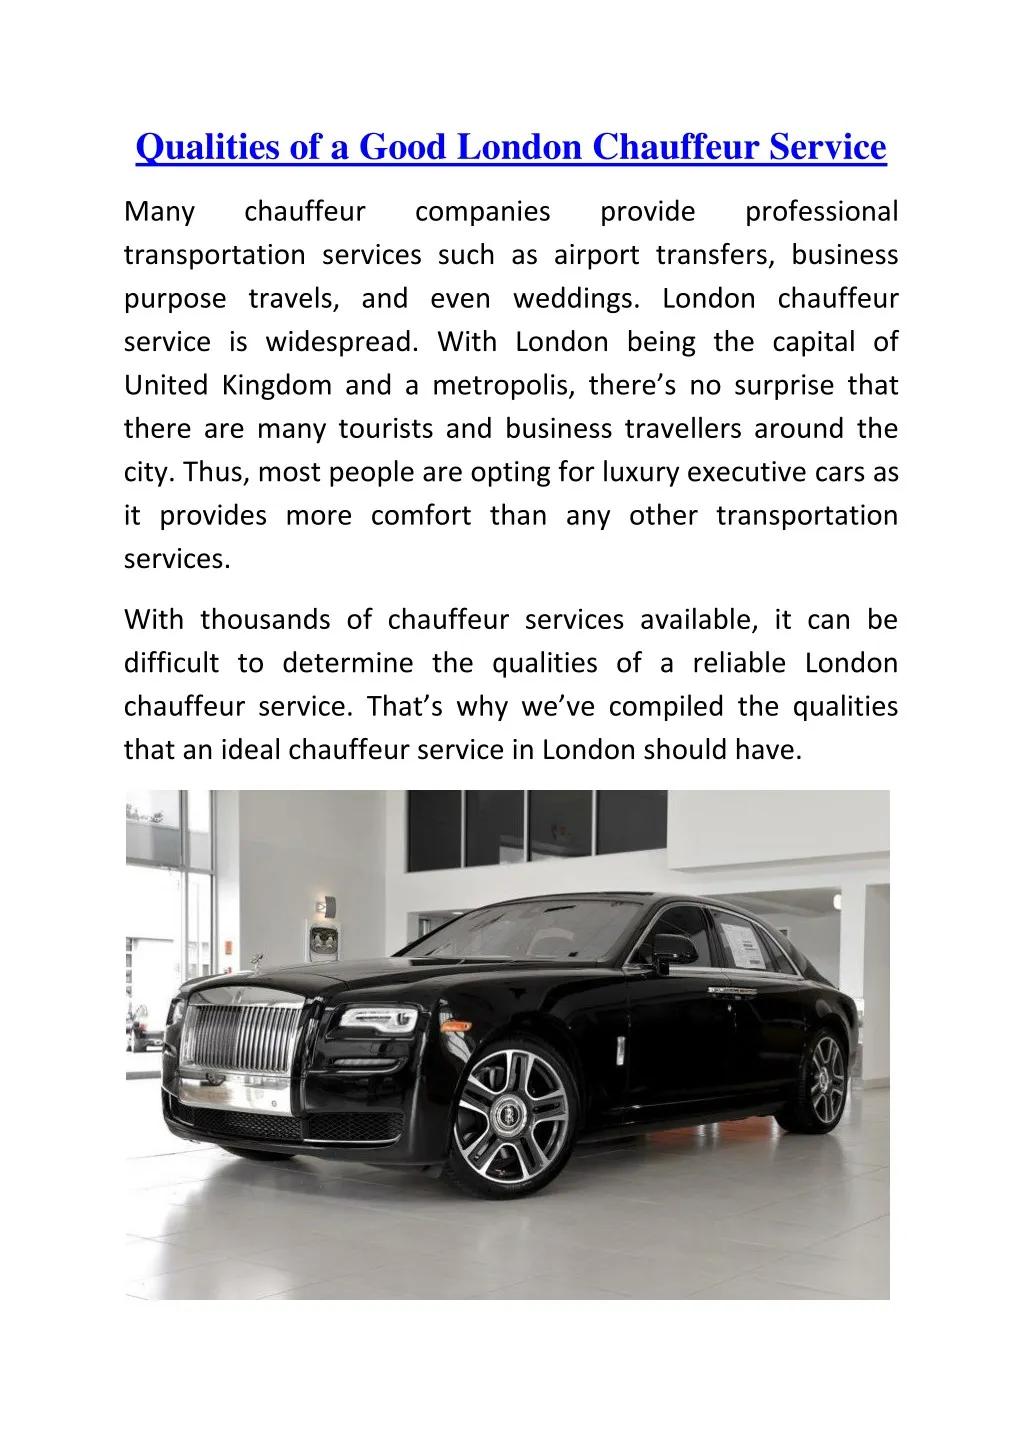 qualities of a good london chauffeur service